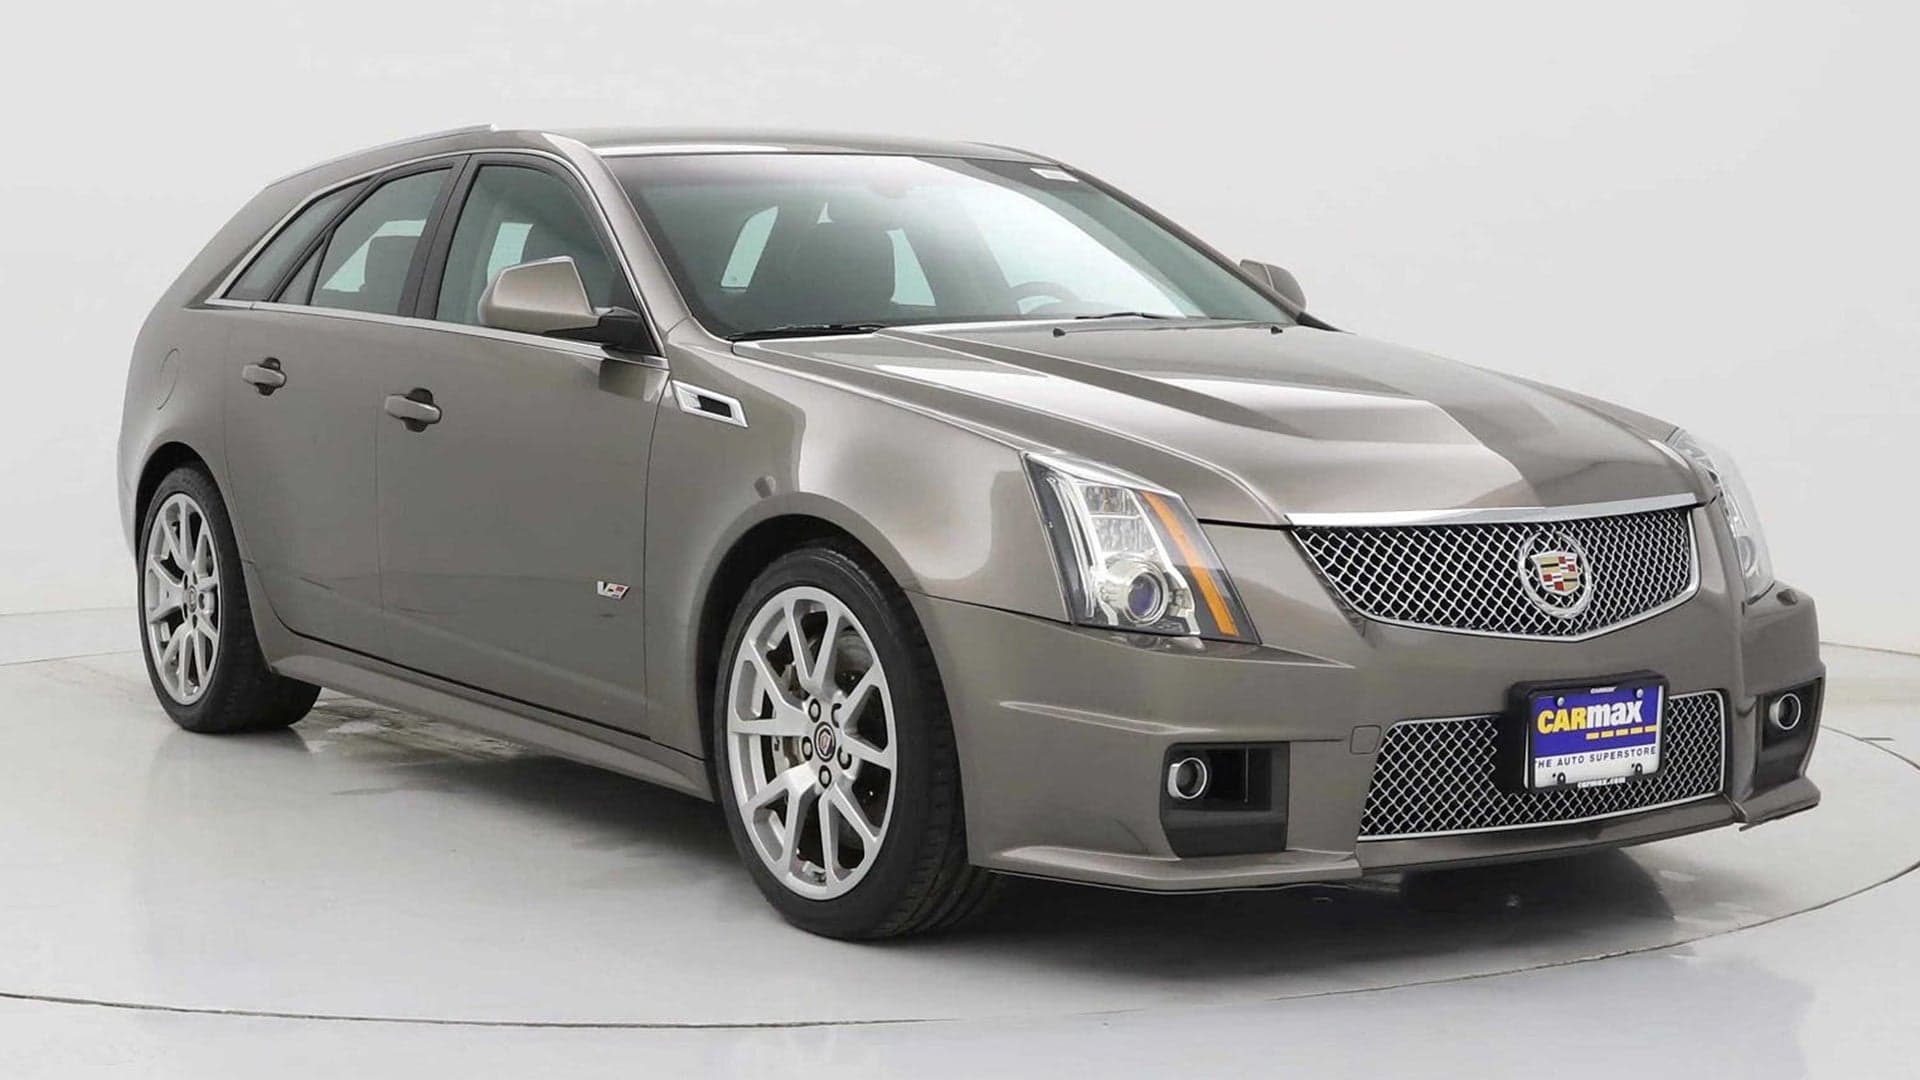 An Honest-To-God Brown Manual Cadillac CTS-V Wagon Can Be Yours For $52,000